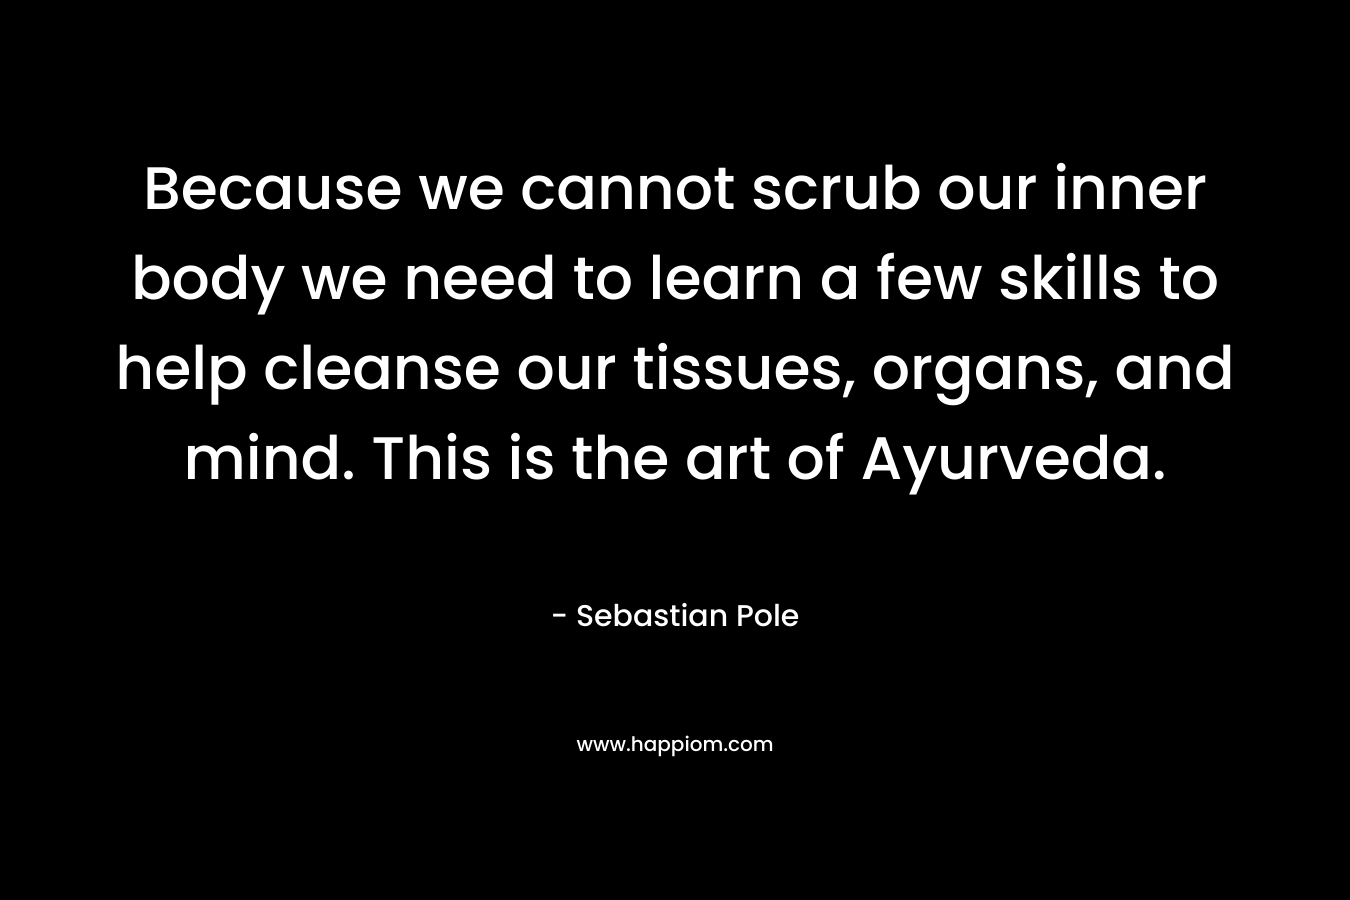 Because we cannot scrub our inner body we need to learn a few skills to help cleanse our tissues, organs, and mind. This is the art of Ayurveda. – Sebastian Pole